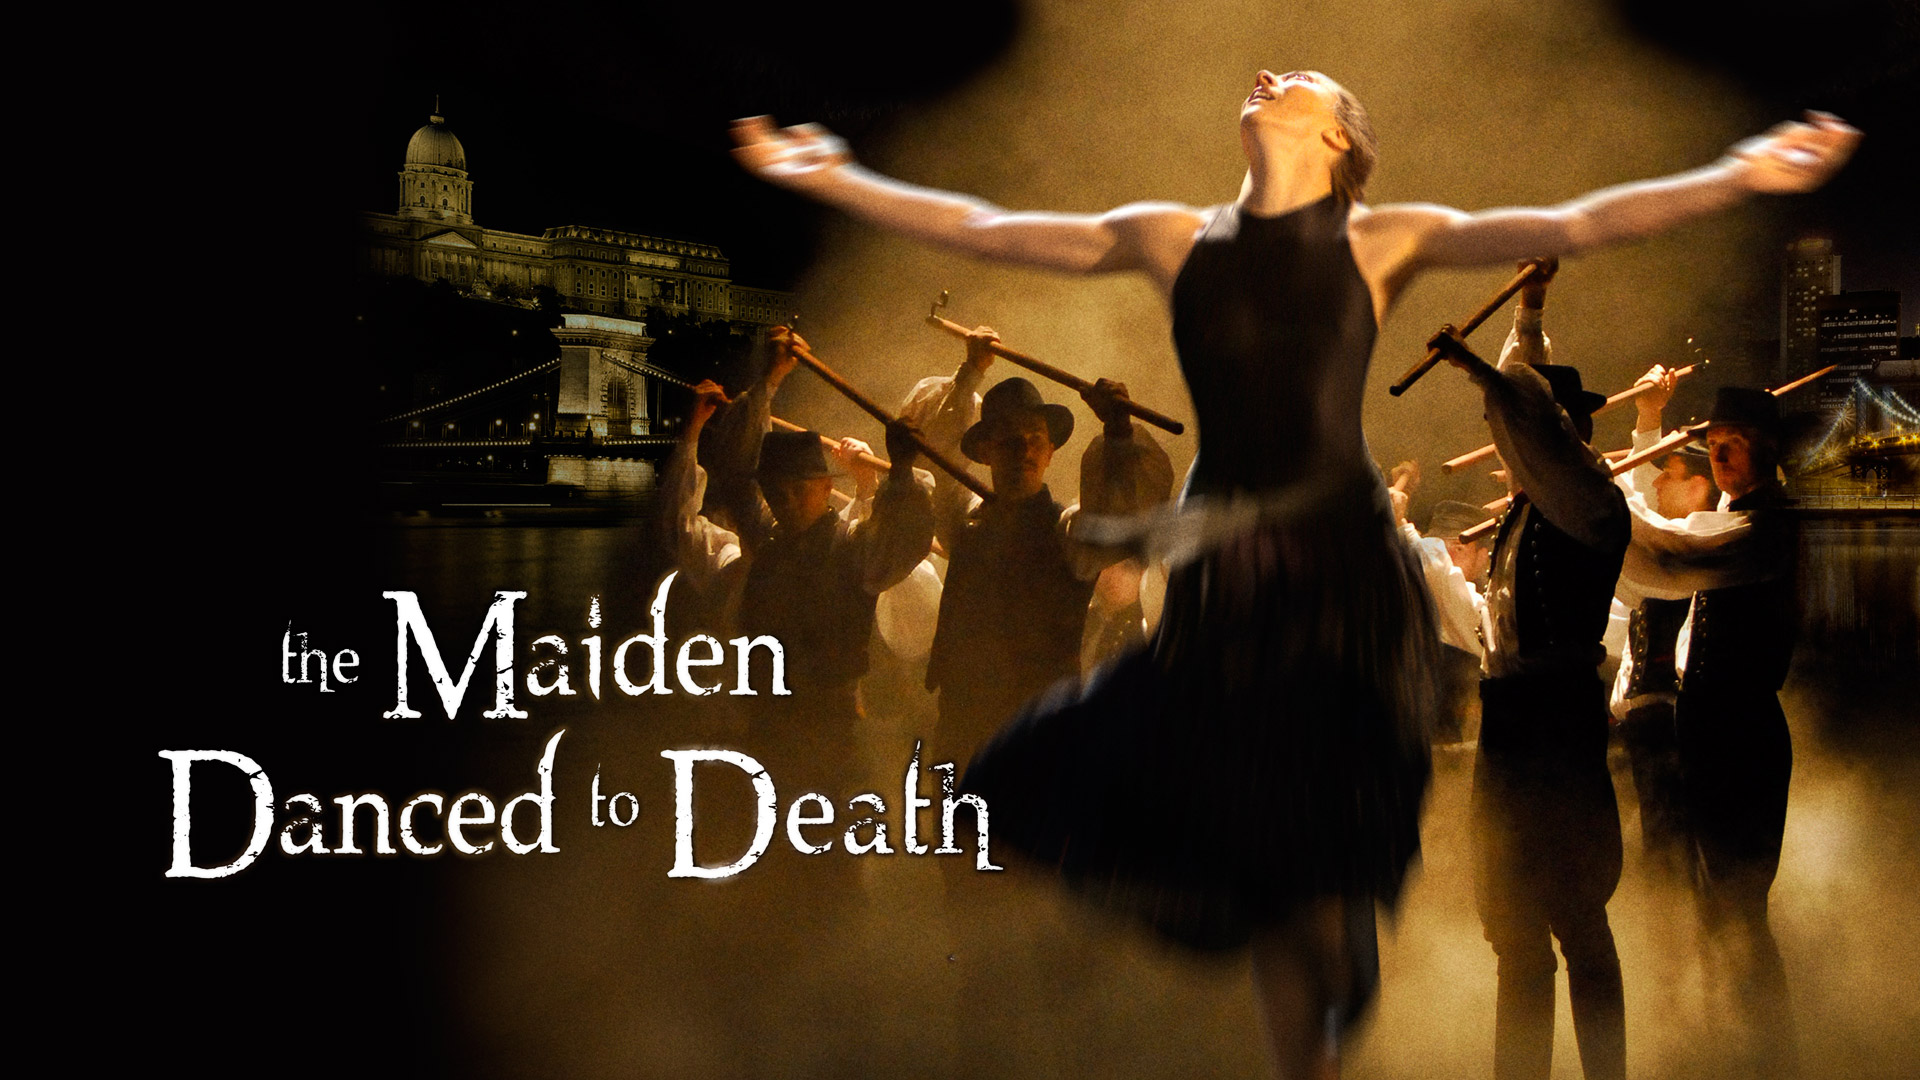 The Maiden Danced To Death